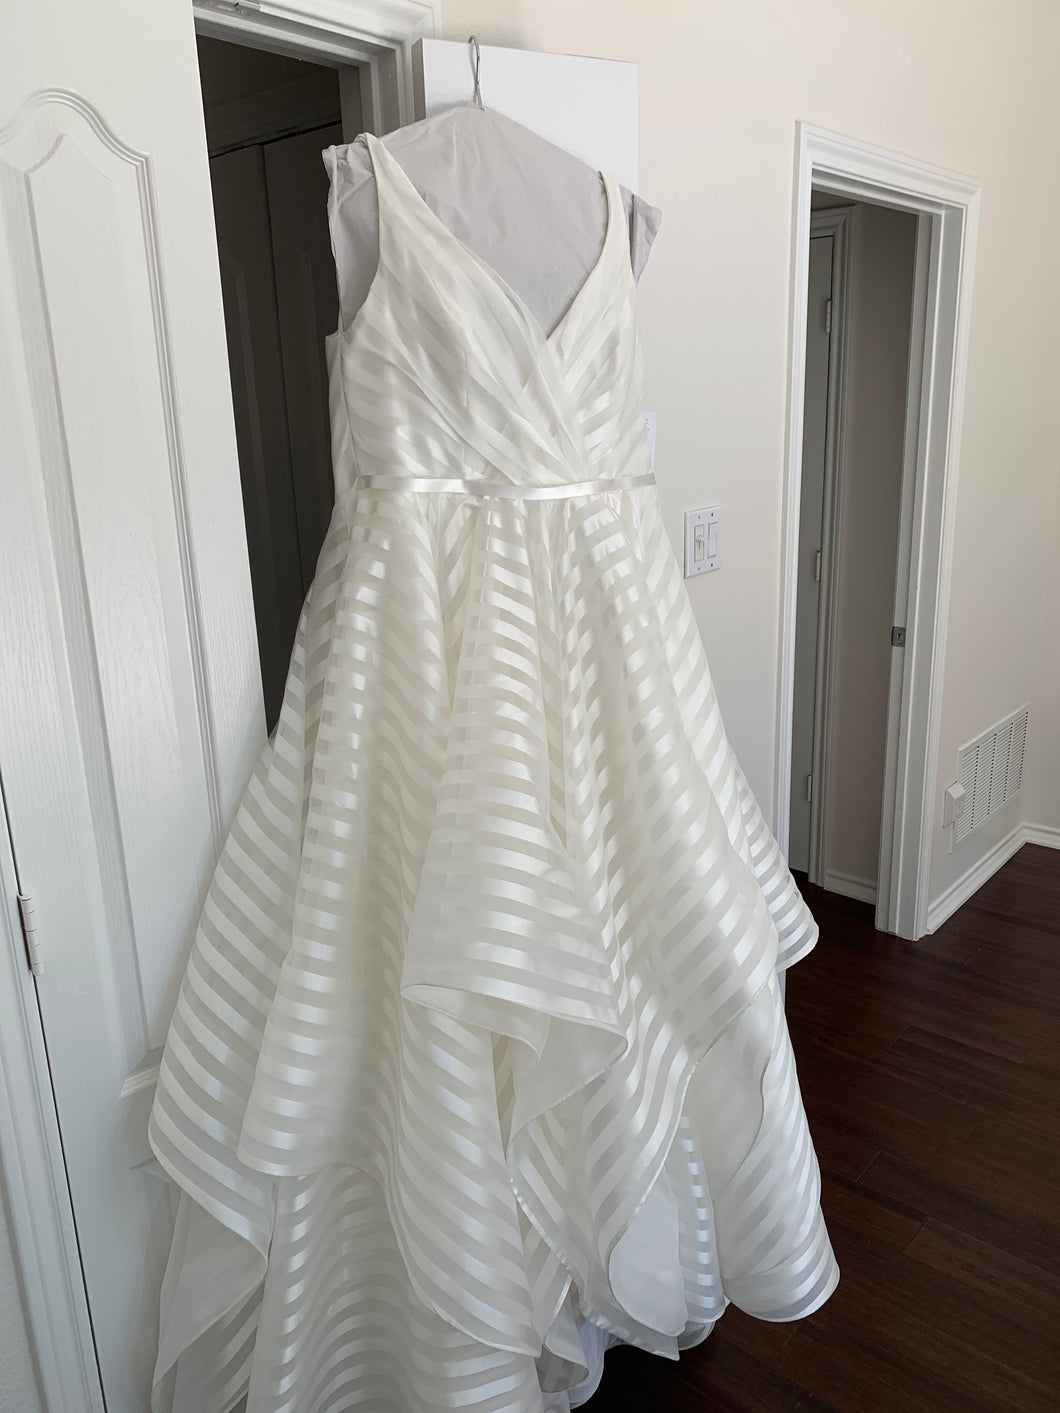 Hayley Paige 'Decklyn' size 16 new wedding dress front view on hanger